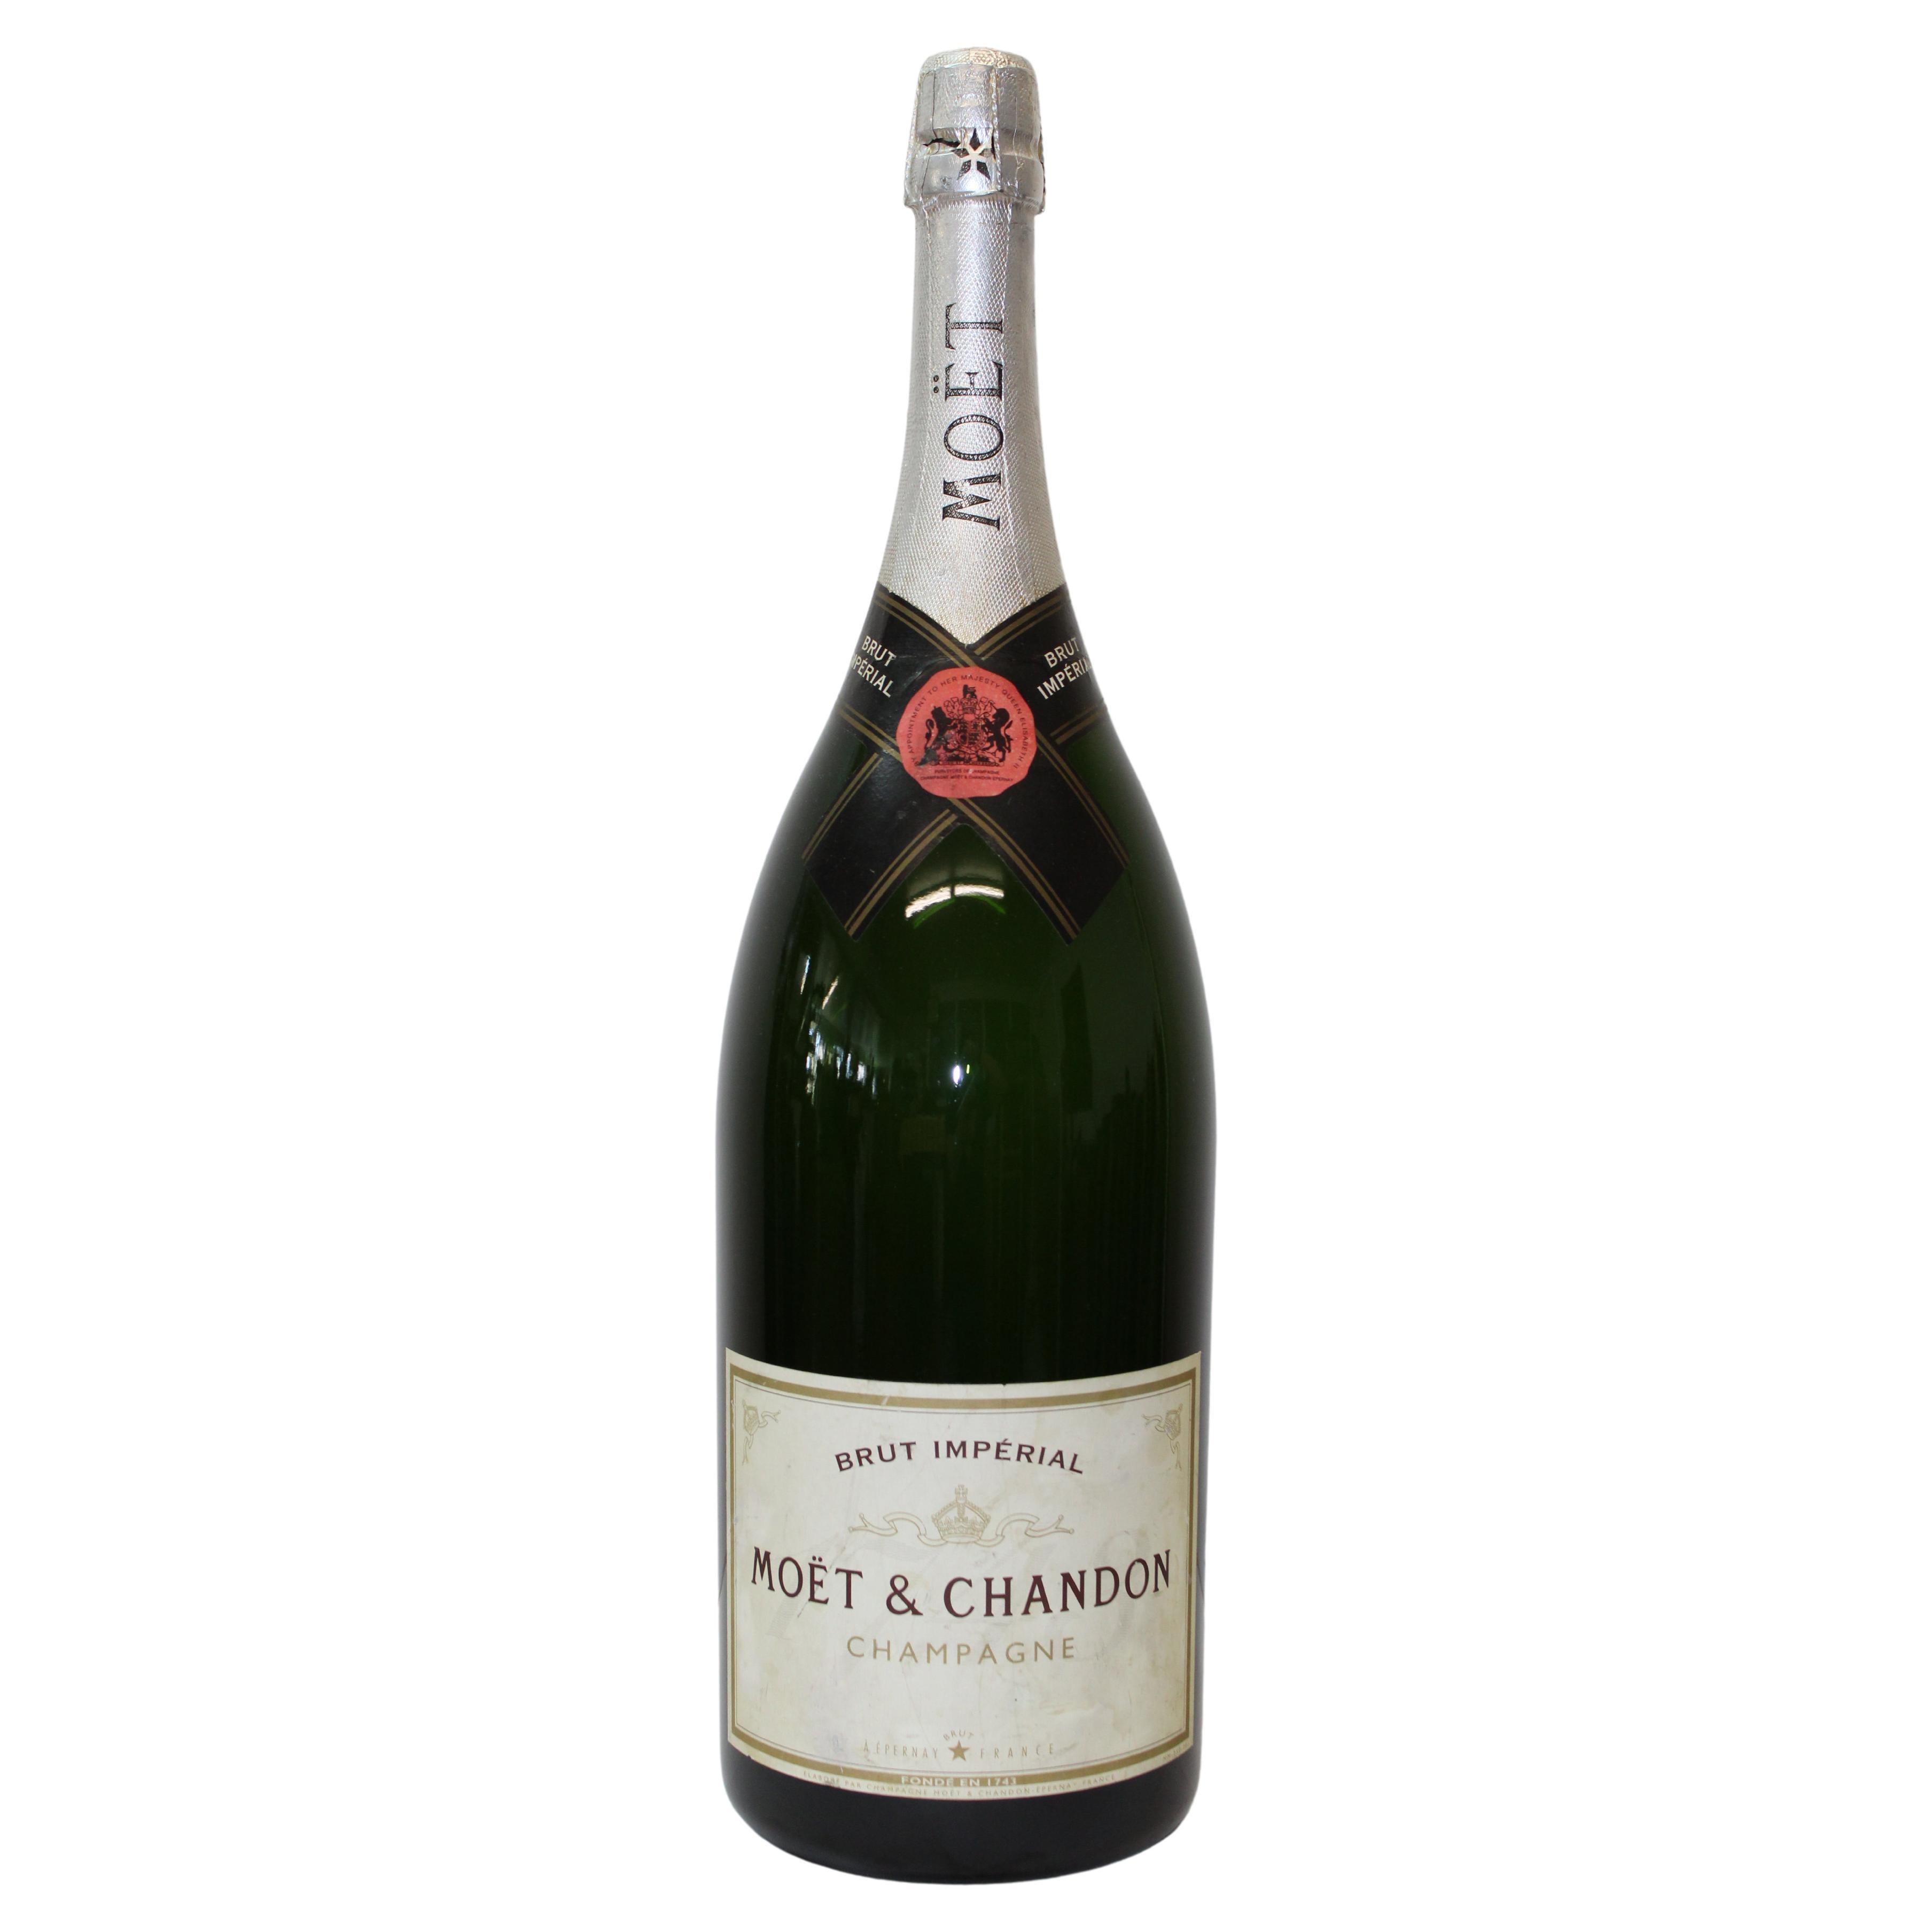 CHATHAM, NJ - JANUARY 13, 2014: Bottle of Moet & Chandon champagne. Moet  Chandon is one of